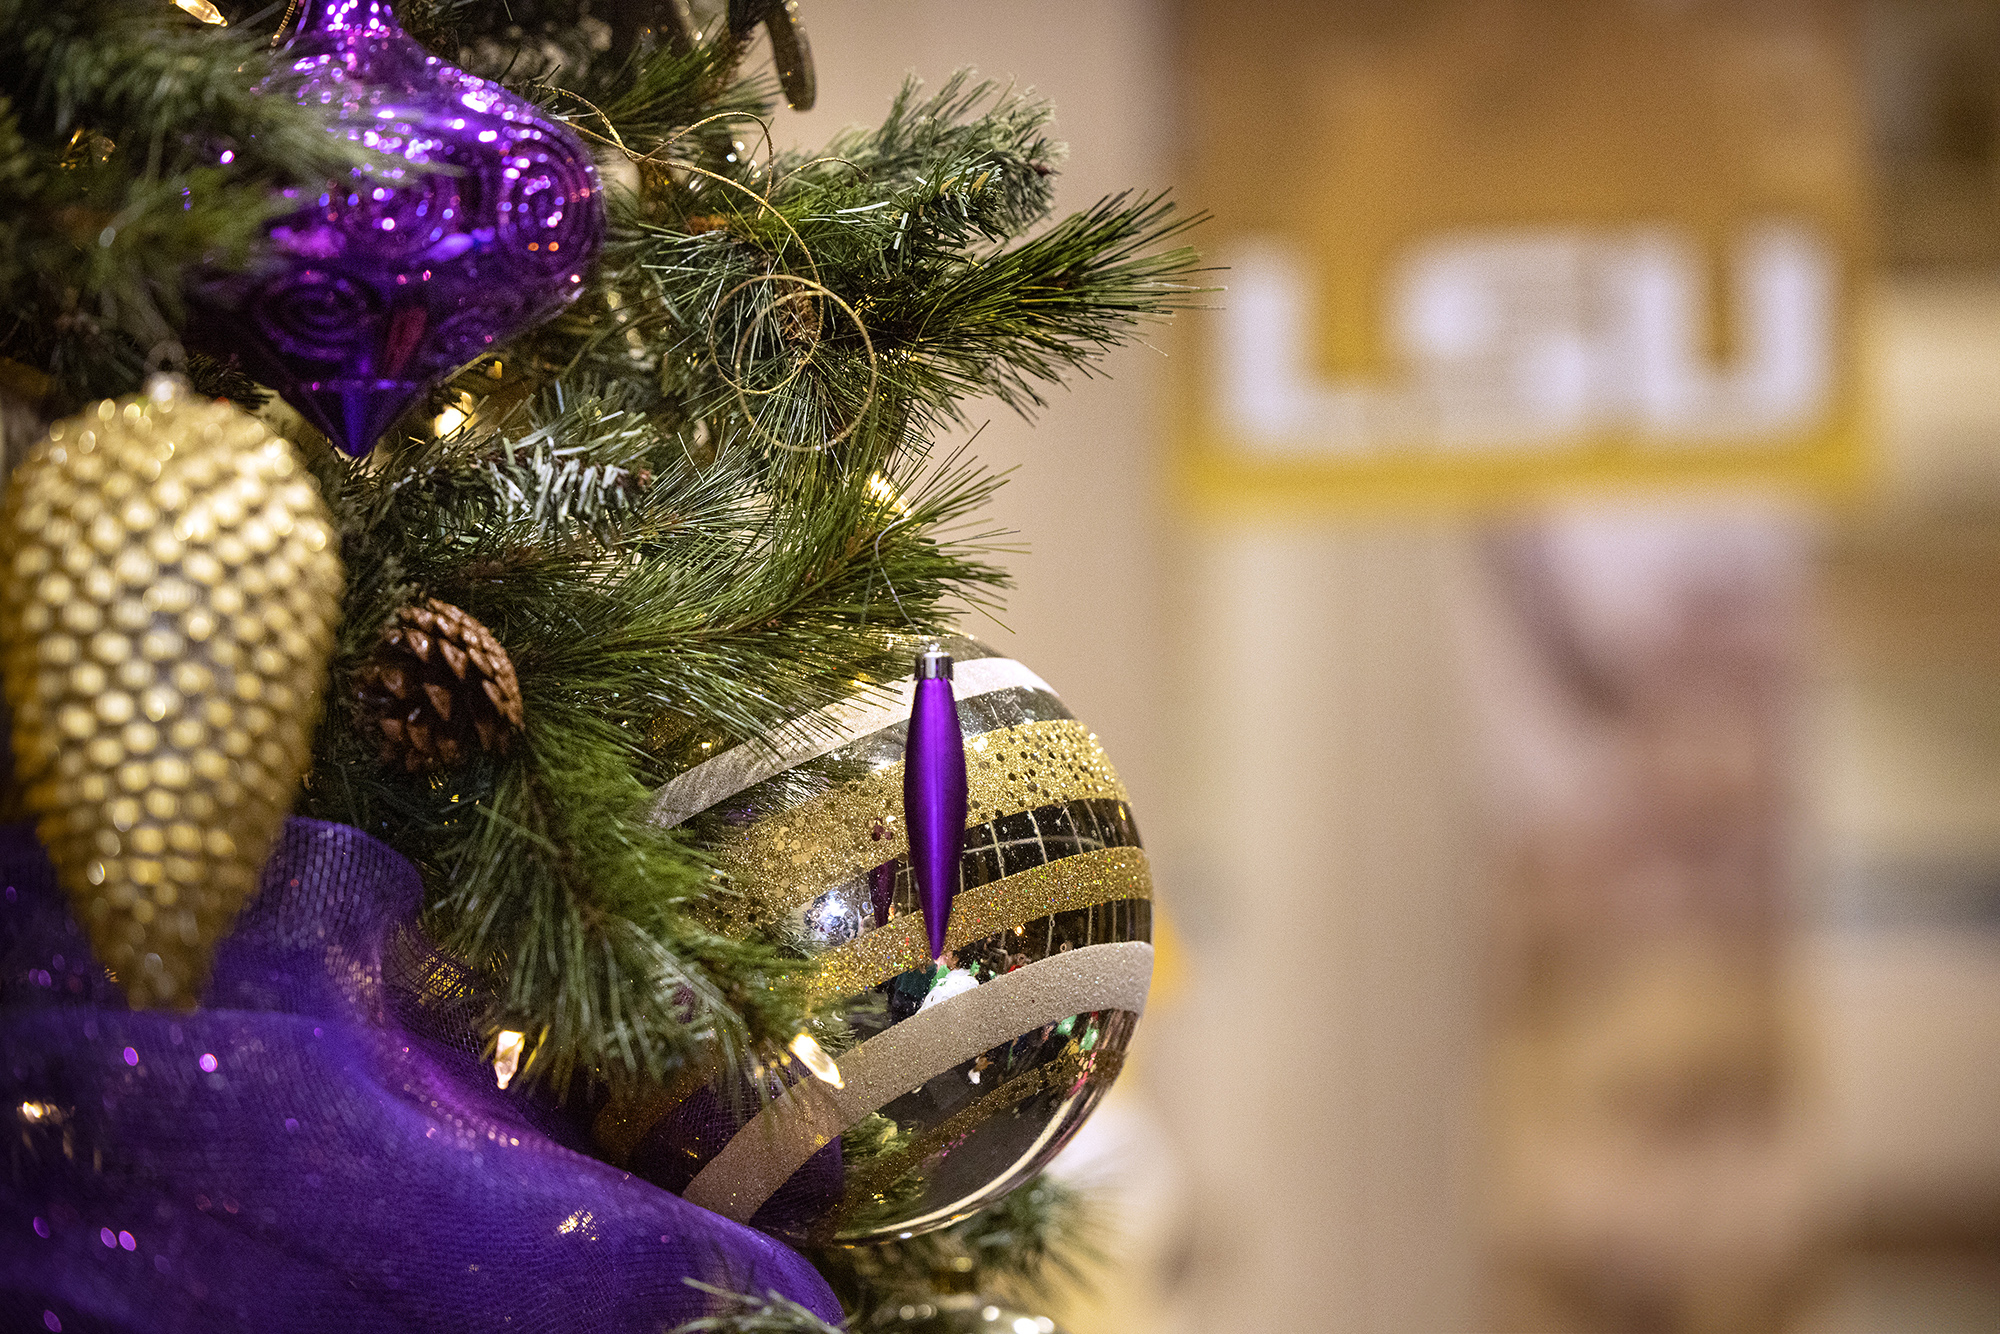 Purple and gold decorations in a close-up on the LSU holiday tree